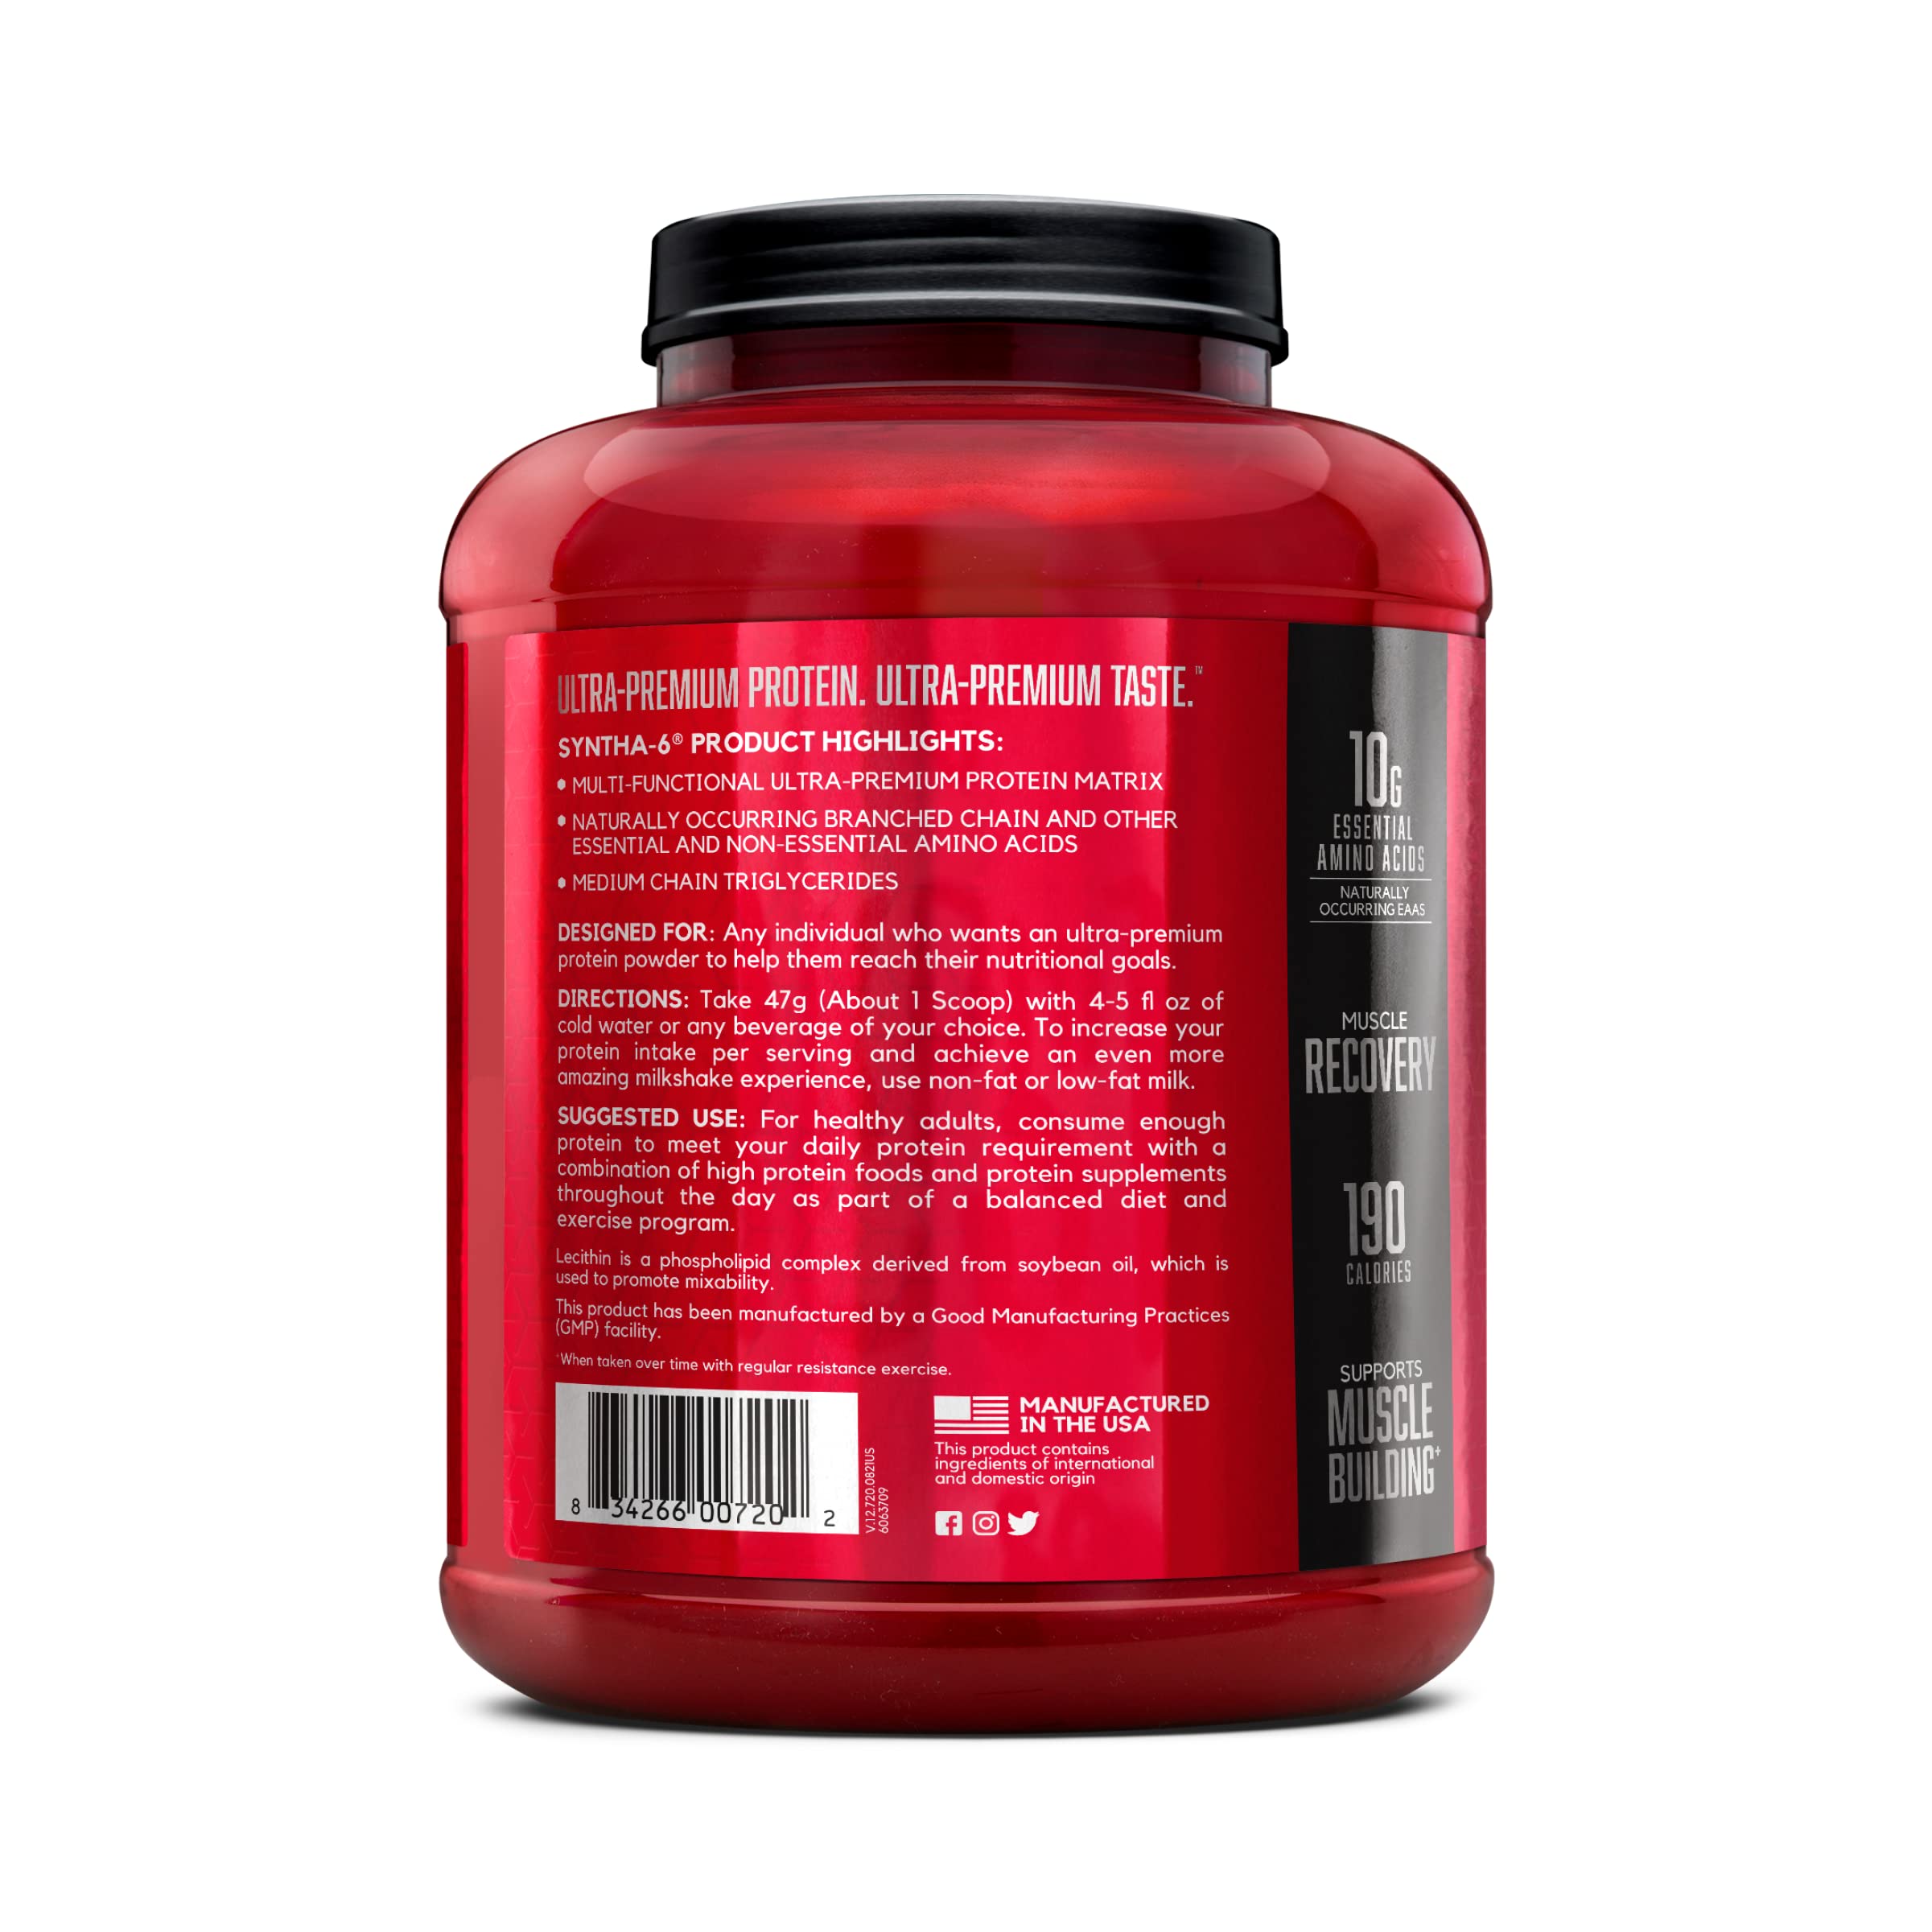 BSN SYNTHA-6 Whey Protein Powder with Micellar Casein, Milk Protein Isolate, Chocolate Milkshake, 48 Servings (Packaging May Vary)